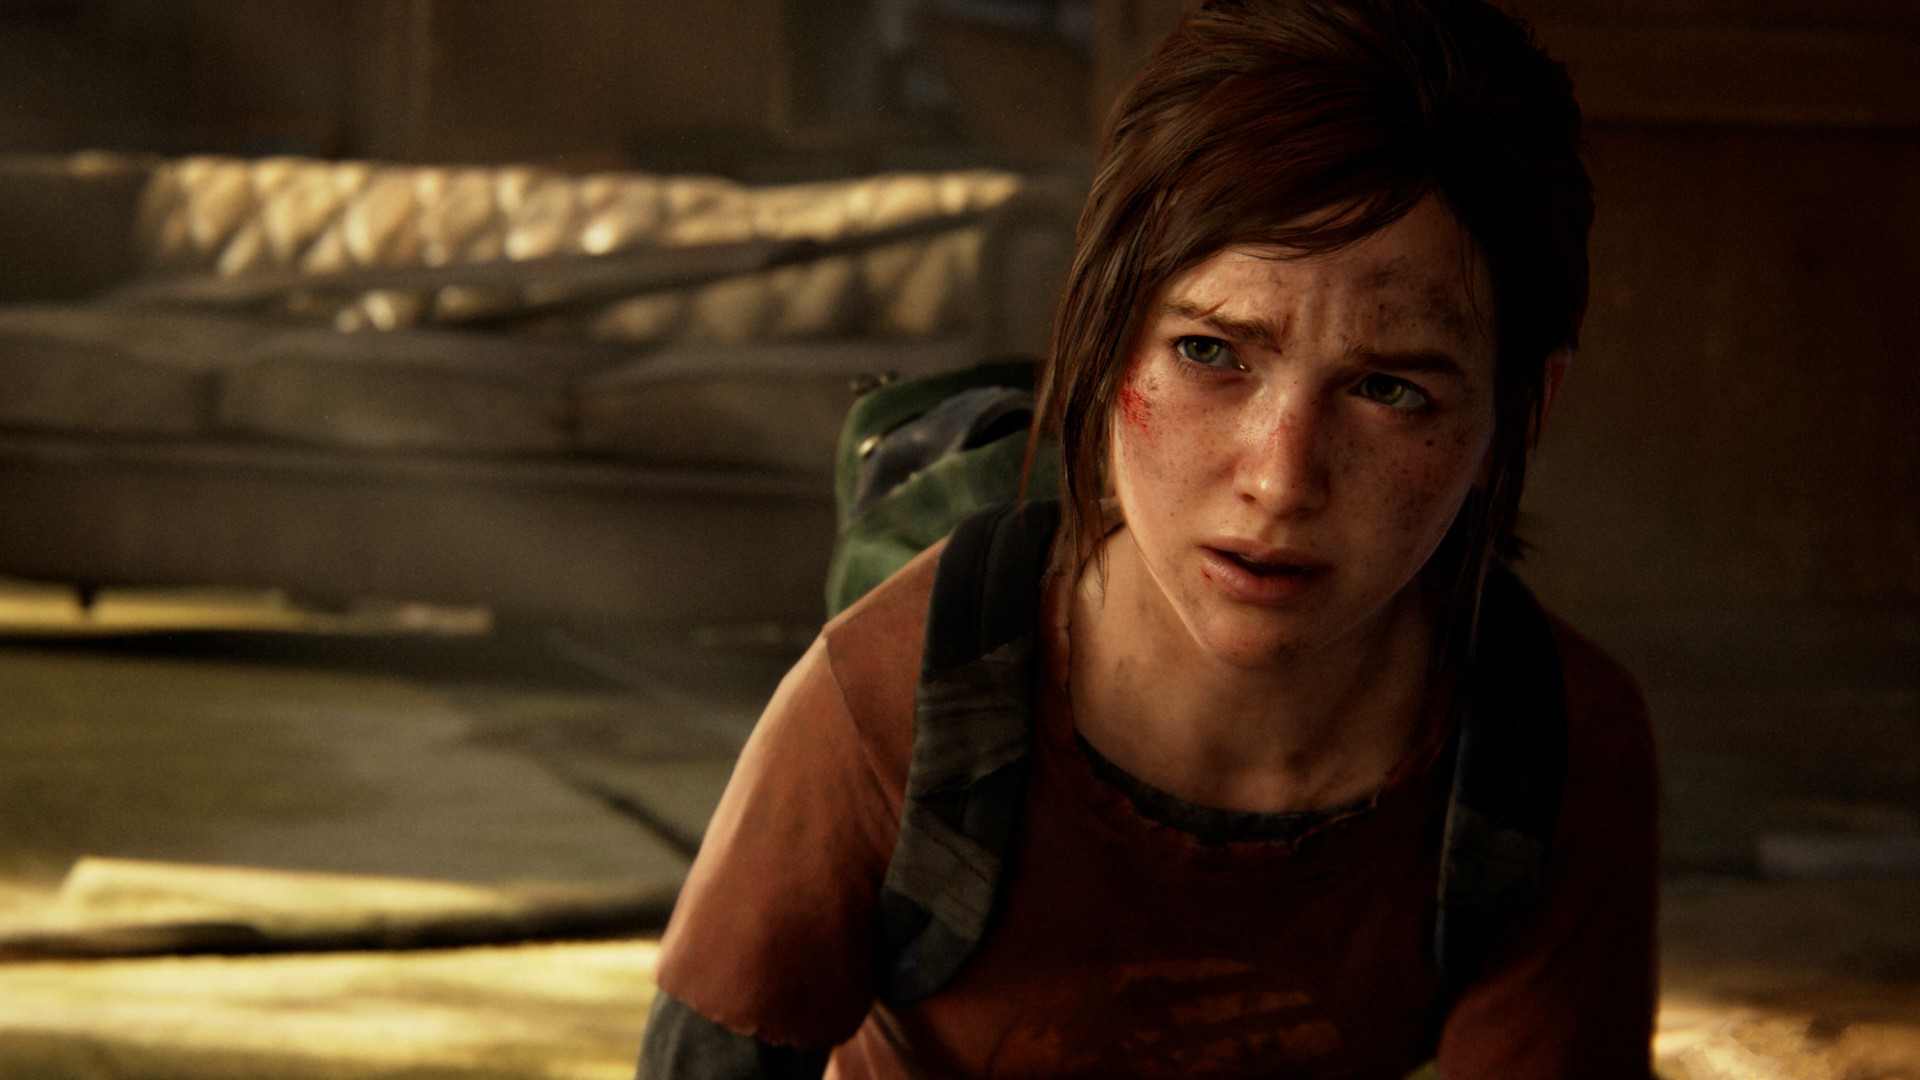 The Last of Us Part 1 PS5 update adds HBO-themed cosmetics for Ellie